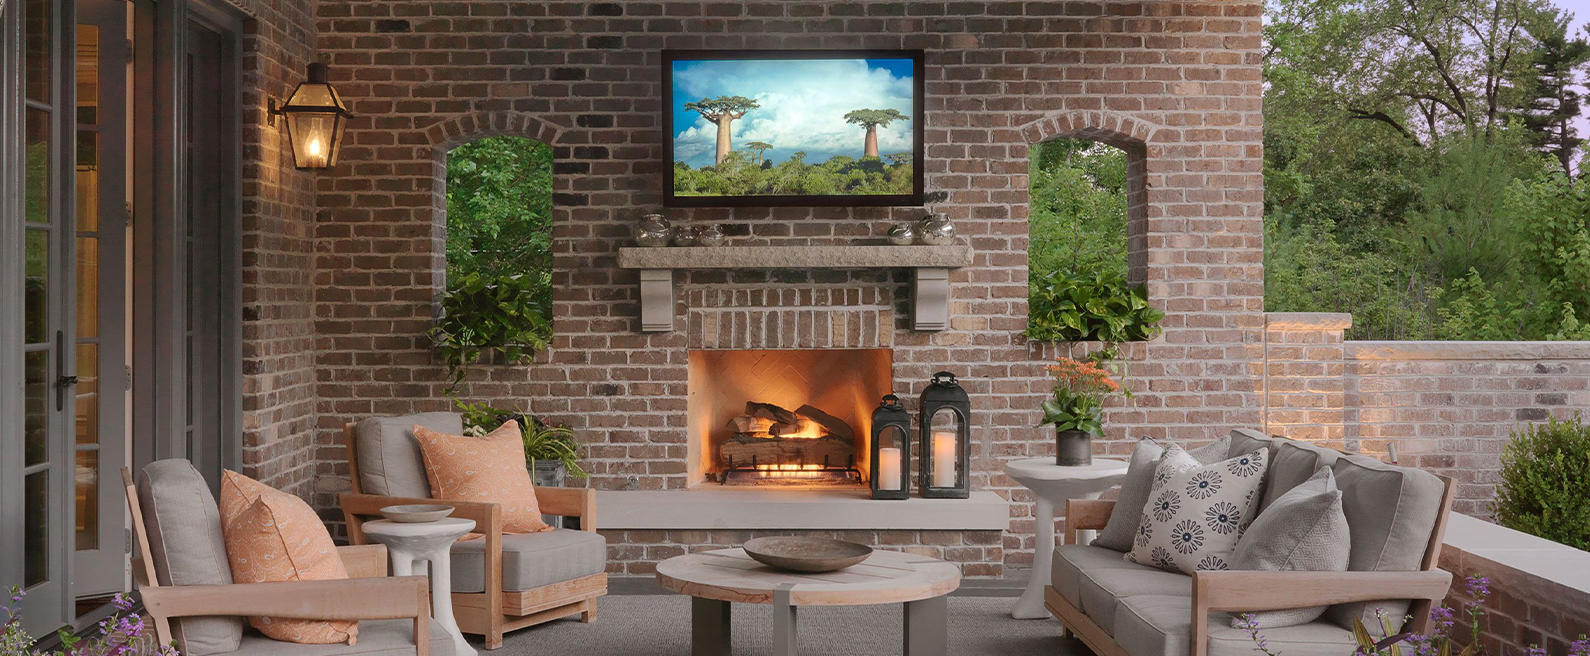 Residential outside lounge with tv and fireplace